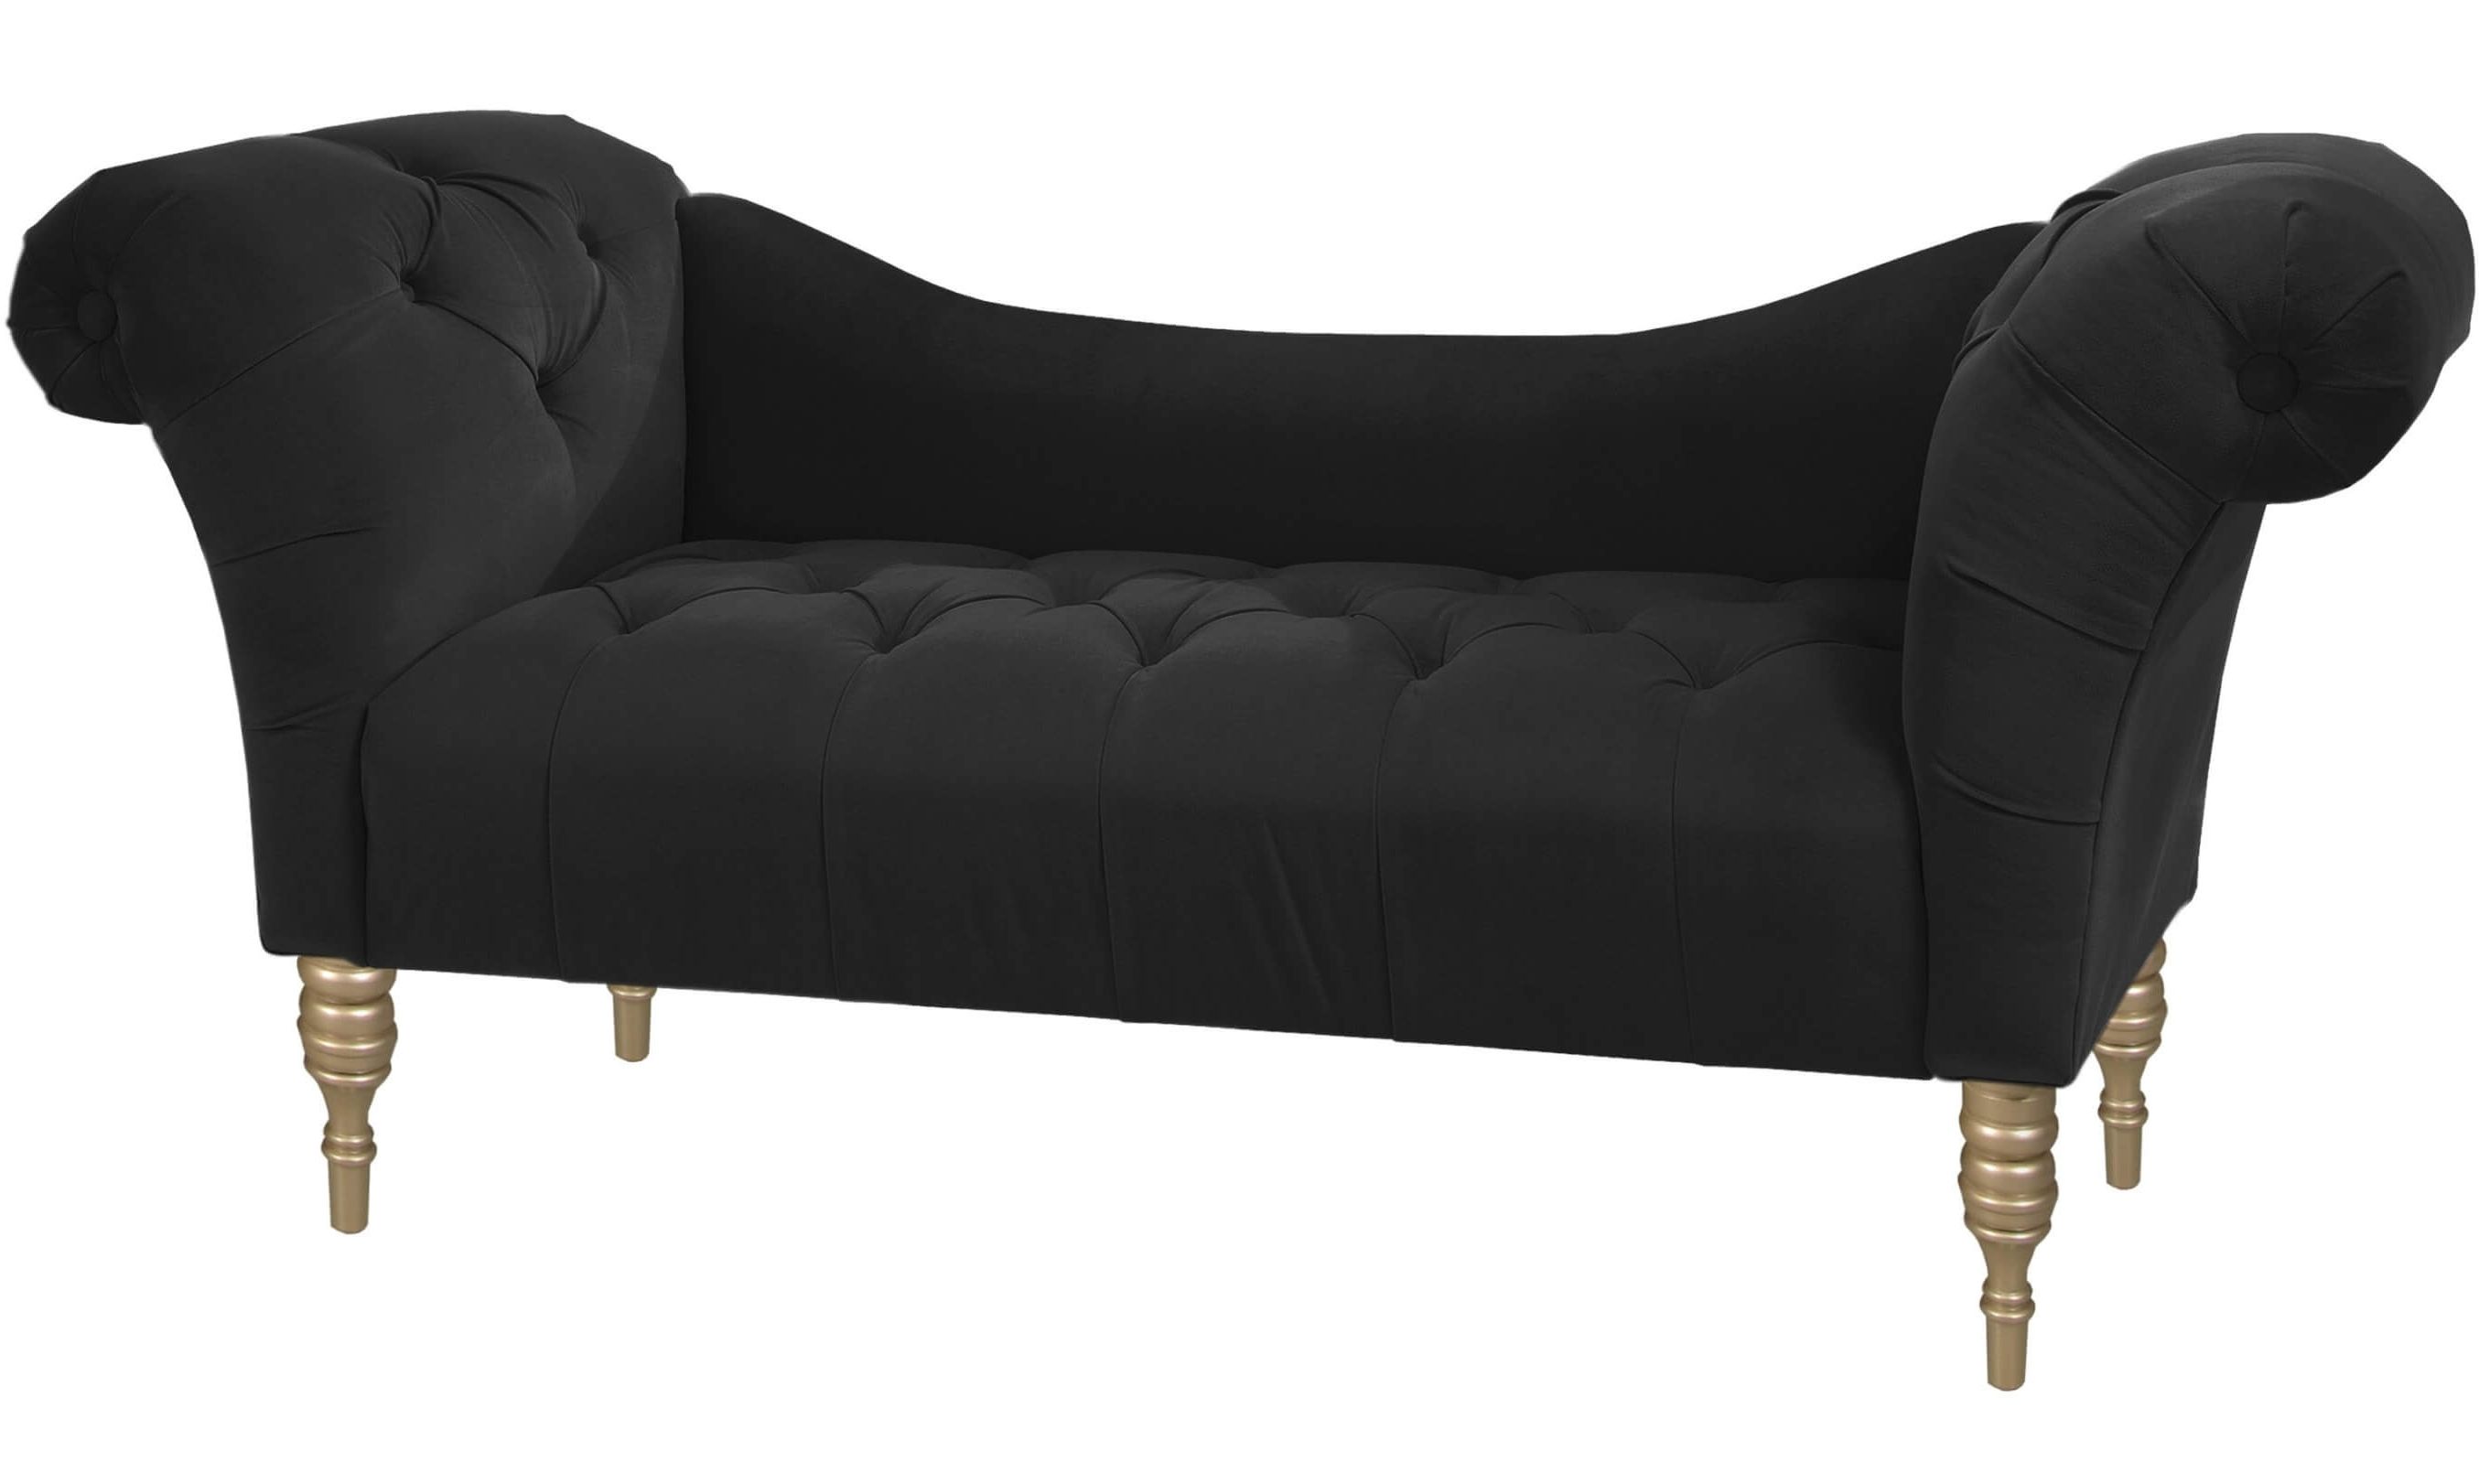 Top 20 Types Of Black Chaise Lounges (Buying Guide) – For Most Up To Date Skyline Chaises (View 9 of 15)